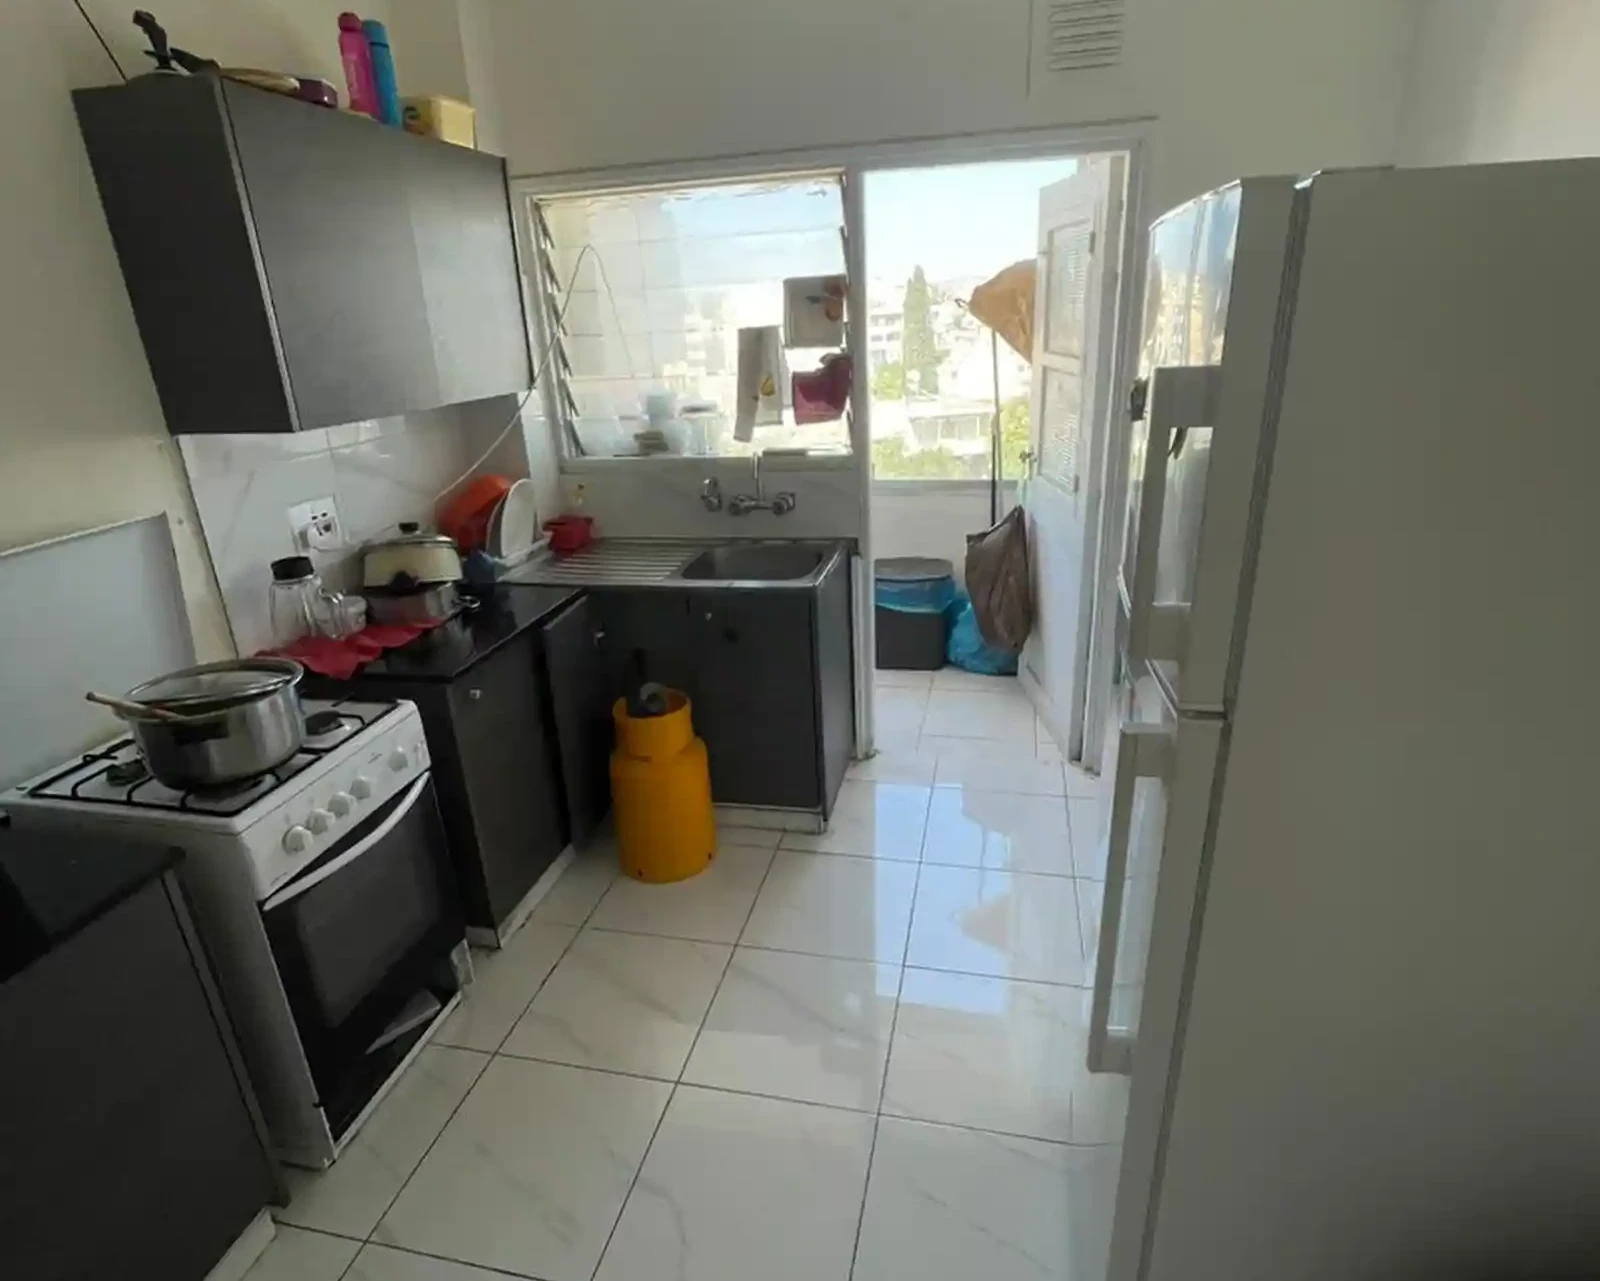 3-bedroom apartment fоr sаle €157.500, image 1